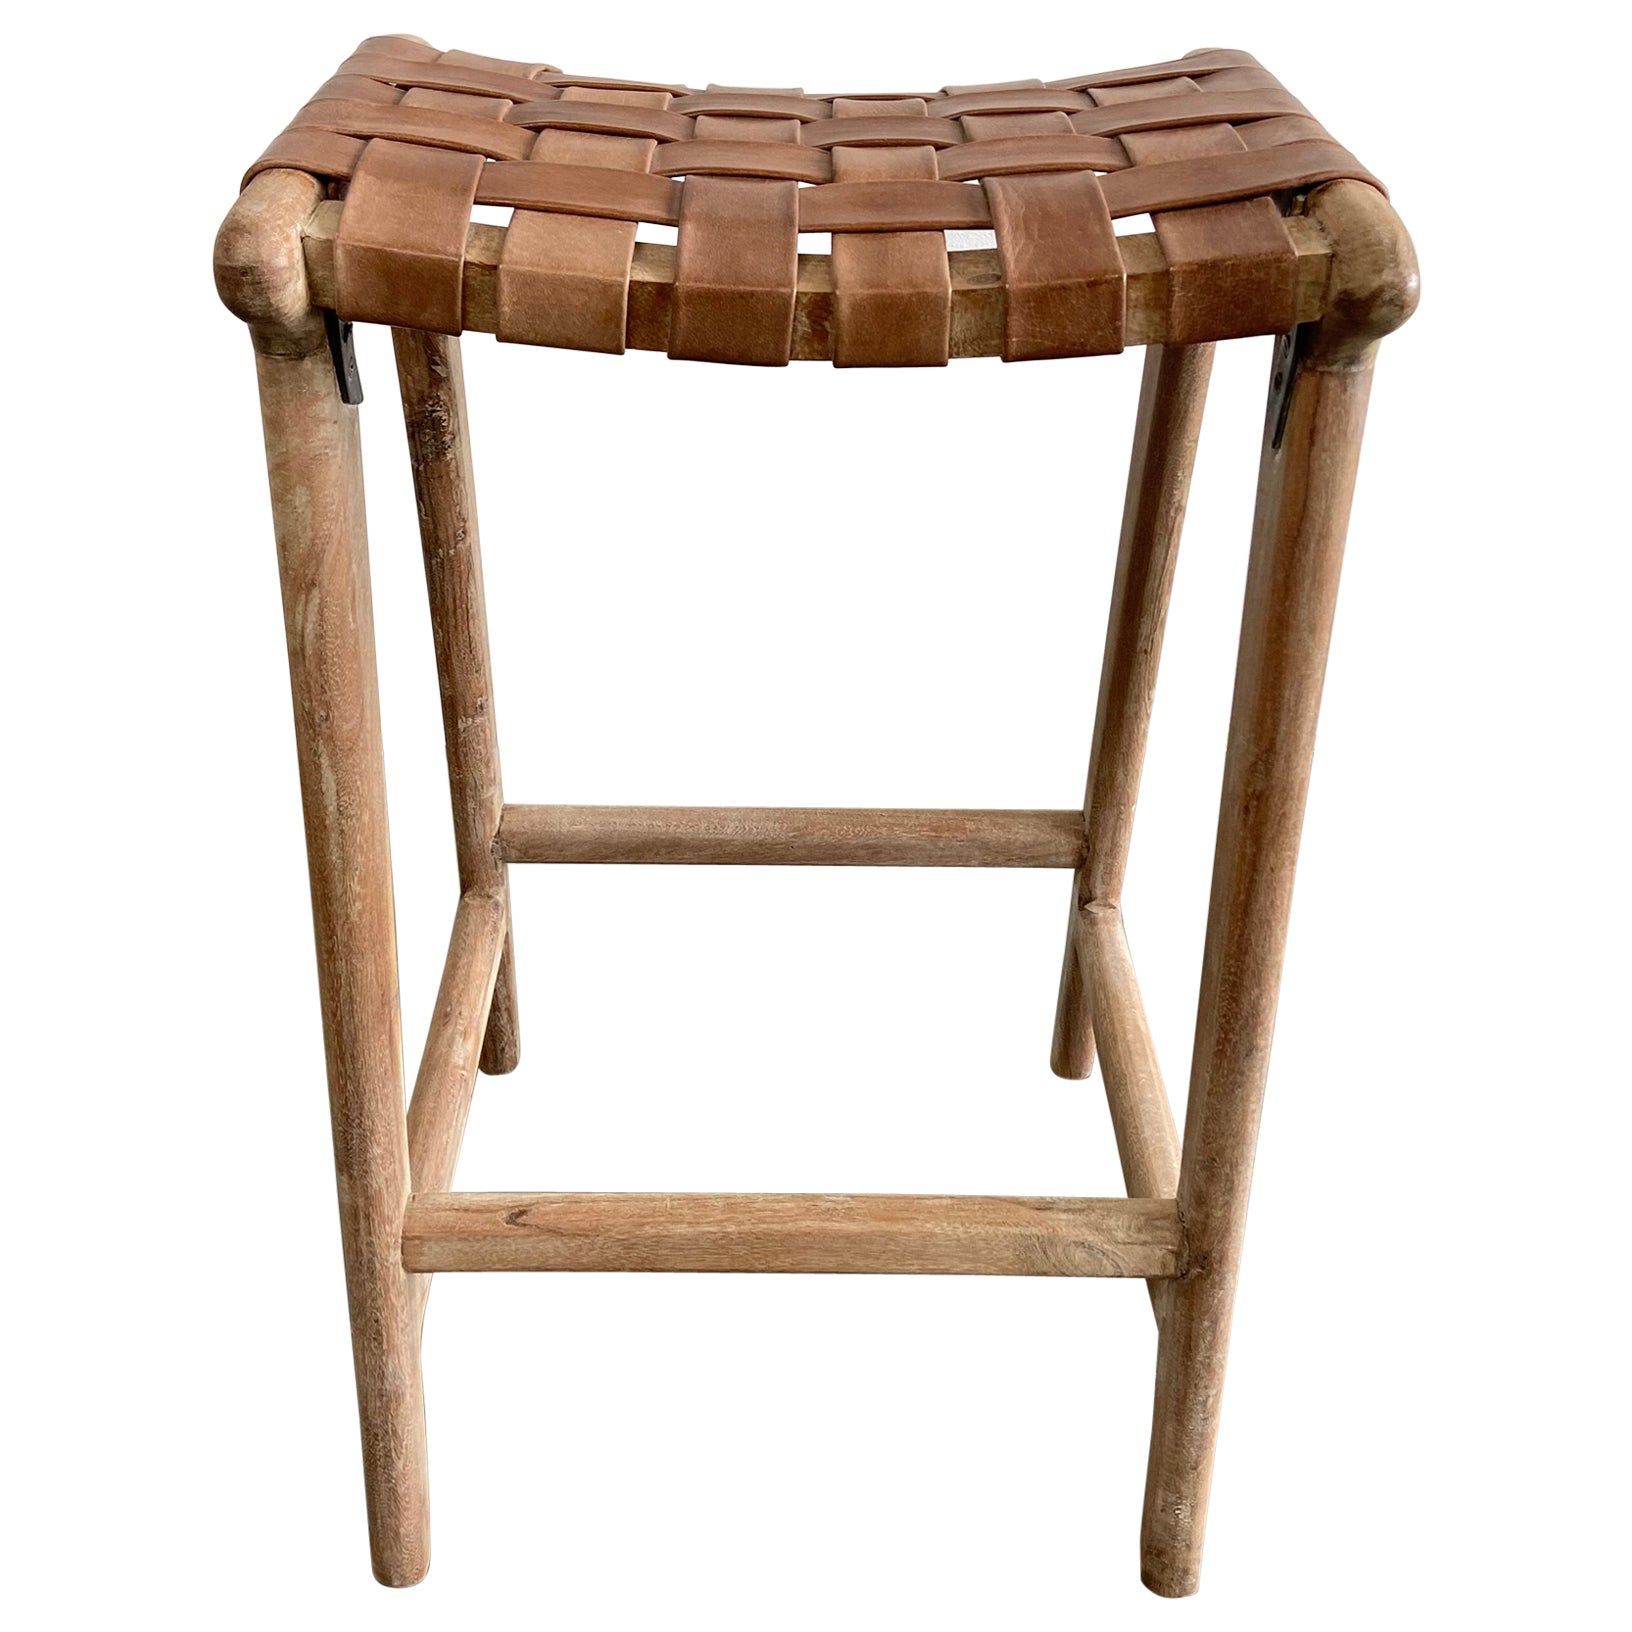 Woven Leather Strap Counter Stools 